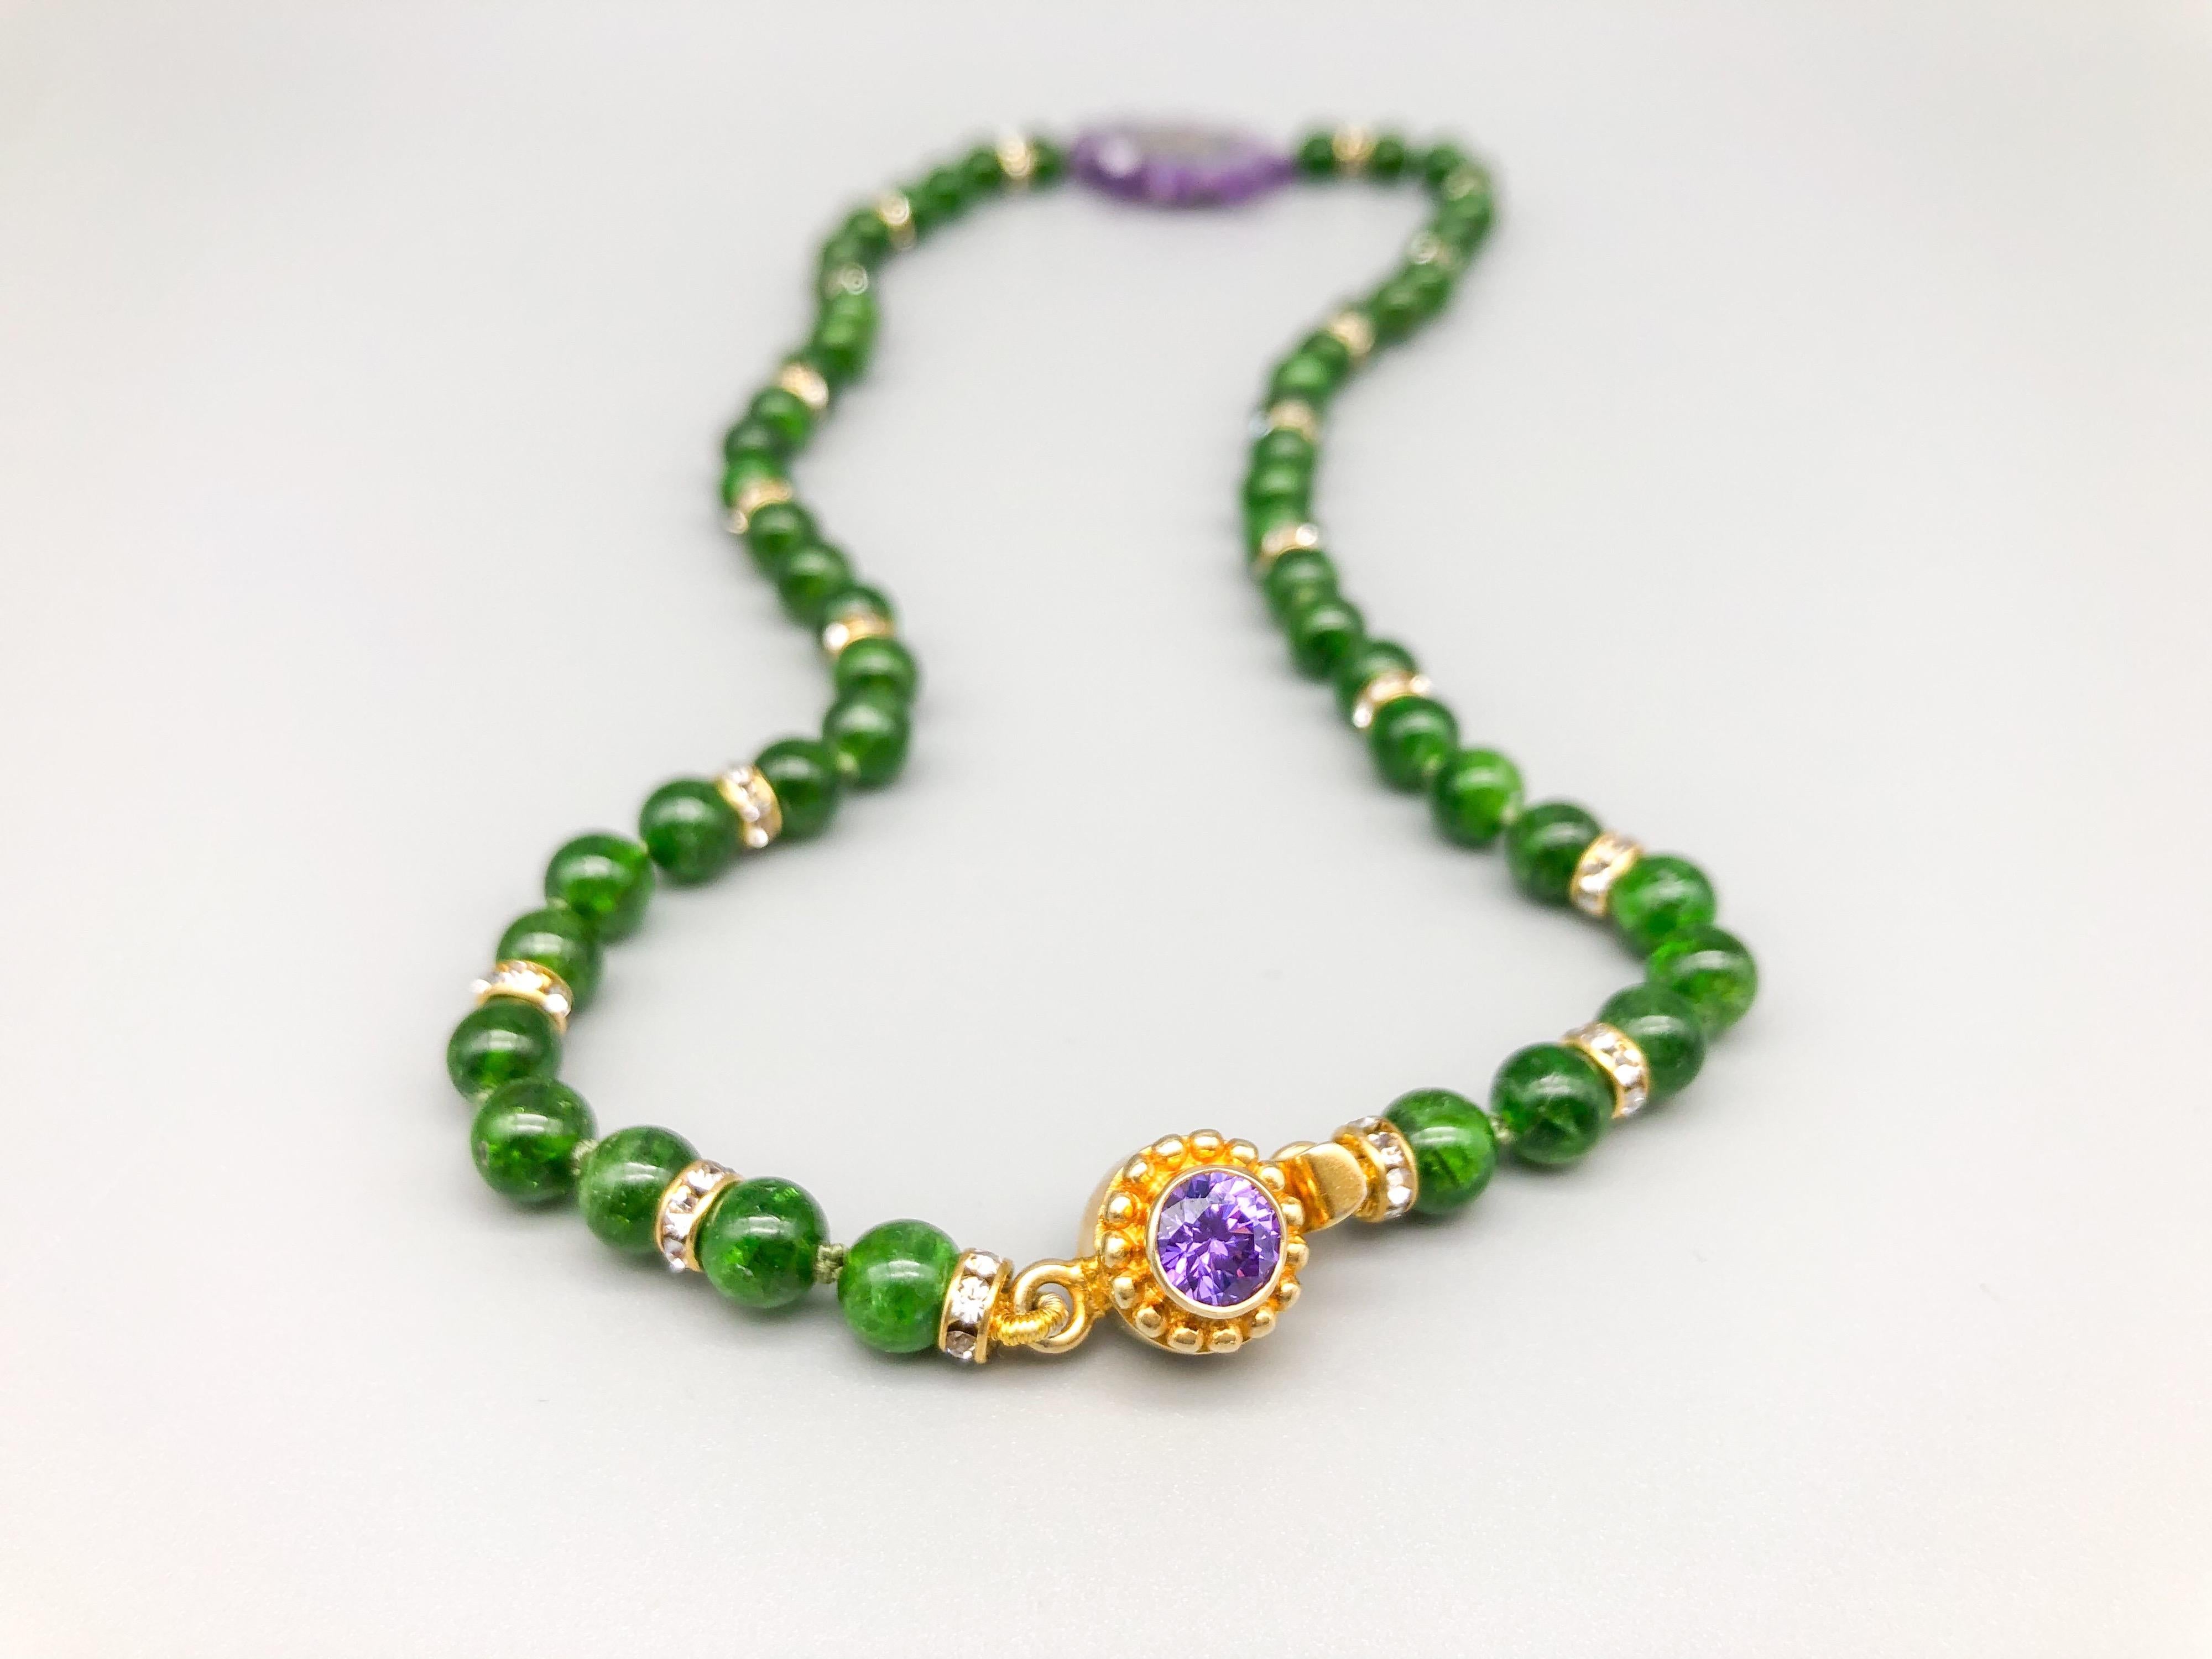 Women's or Men's A.Jeschel Chrome Diopside beads with an Amethyst Stalactite Pendant. For Sale